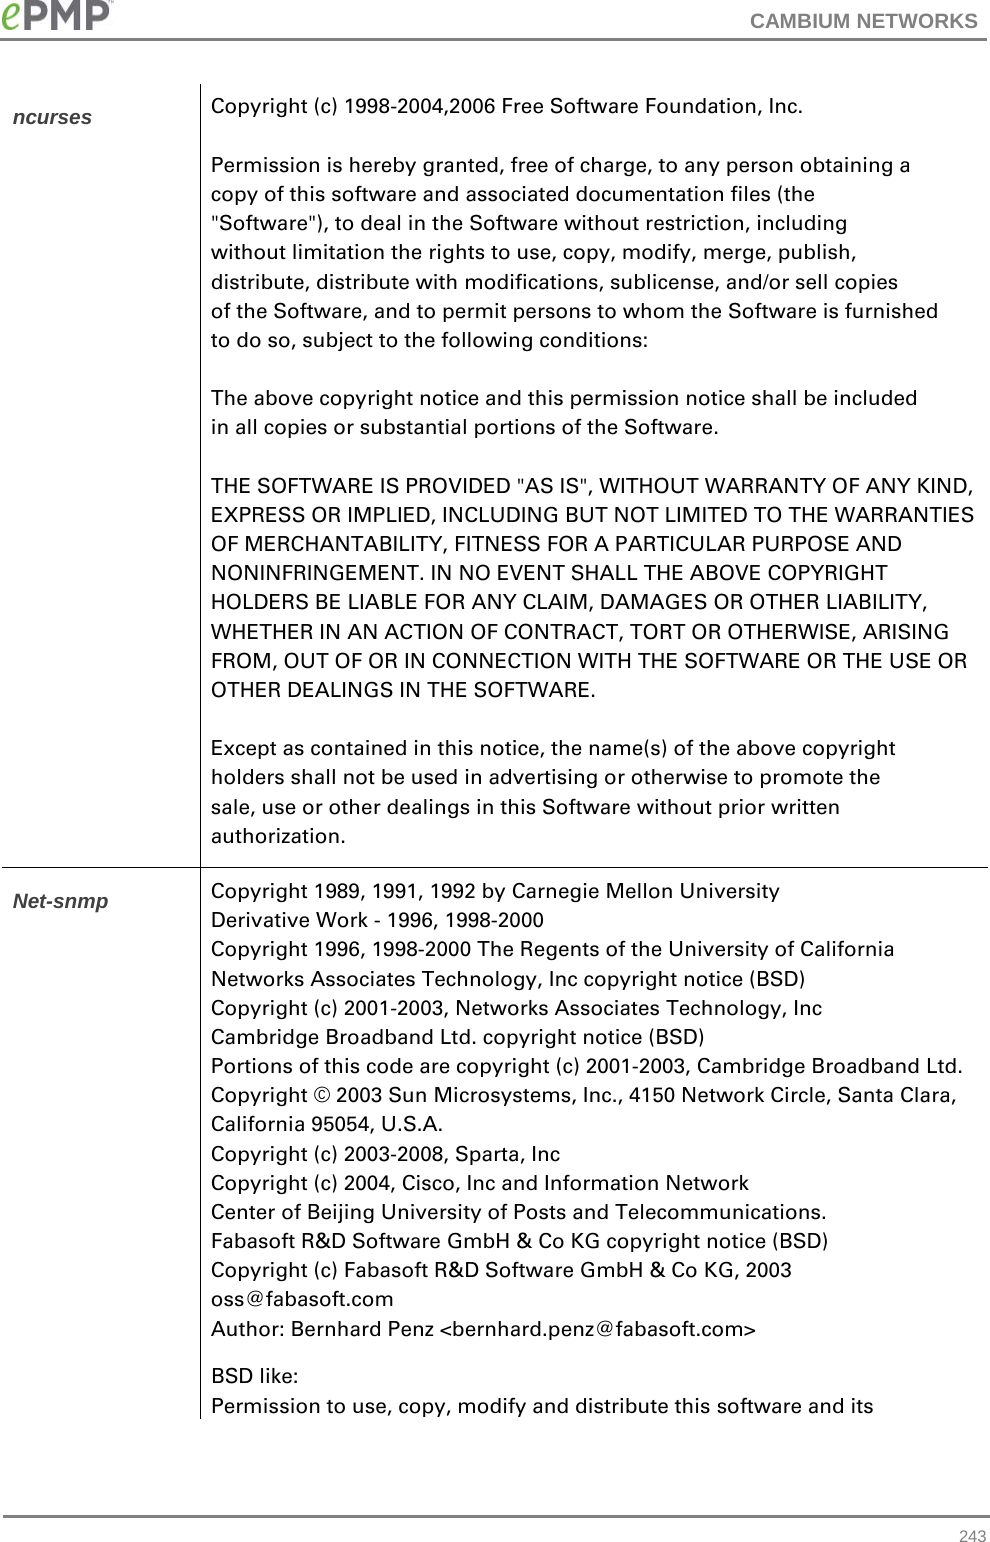 CAMBIUM NETWORKS  ncurses Copyright (c) 1998-2004,2006 Free Software Foundation, Inc.                                                                                           Permission is hereby granted, free of charge, to any person obtaining a    copy of this software and associated documentation files (the              &quot;Software&quot;), to deal in the Software without restriction, including        without limitation the rights to use, copy, modify, merge, publish,        distribute, distribute with modifications, sublicense, and/or sell copies  of the Software, and to permit persons to whom the Software is furnished   to do so, subject to the following conditions:                                                                                                        The above copyright notice and this permission notice shall be included    in all copies or substantial portions of the Software.                                                                                                THE SOFTWARE IS PROVIDED &quot;AS IS&quot;, WITHOUT WARRANTY OF ANY KIND, EXPRESS OR IMPLIED, INCLUDING BUT NOT LIMITED TO THE WARRANTIES OF MERCHANTABILITY, FITNESS FOR A PARTICULAR PURPOSE AND NONINFRINGEMENT. IN NO EVENT SHALL THE ABOVE COPYRIGHT HOLDERS BE LIABLE FOR ANY CLAIM, DAMAGES OR OTHER LIABILITY, WHETHER IN AN ACTION OF CONTRACT, TORT OR OTHERWISE, ARISING FROM, OUT OF OR IN CONNECTION WITH THE SOFTWARE OR THE USE OR OTHER DEALINGS IN THE SOFTWARE.                                                                                                                Except as contained in this notice, the name(s) of the above copyright     holders shall not be used in advertising or otherwise to promote the       sale, use or other dealings in this Software without prior written         authorization.                                                           Net-snmp Copyright 1989, 1991, 1992 by Carnegie Mellon University Derivative Work - 1996, 1998-2000 Copyright 1996, 1998-2000 The Regents of the University of California  Networks Associates Technology, Inc copyright notice (BSD)  Copyright (c) 2001-2003, Networks Associates Technology, Inc        Cambridge Broadband Ltd. copyright notice (BSD)  Portions of this code are copyright (c) 2001-2003, Cambridge Broadband Ltd.  Copyright © 2003 Sun Microsystems, Inc., 4150 Network Circle, Santa Clara, California 95054, U.S.A.  Copyright (c) 2003-2008, Sparta, Inc   Copyright (c) 2004, Cisco, Inc and Information Network Center of Beijing University of Posts and Telecommunications.  Fabasoft R&amp;D Software GmbH &amp; Co KG copyright notice (BSD)  Copyright (c) Fabasoft R&amp;D Software GmbH &amp; Co KG, 2003 oss@fabasoft.com Author: Bernhard Penz &lt;bernhard.penz@fabasoft.com&gt; BSD like:                                                                                                                     Permission to use, copy, modify and distribute this software and its  243 